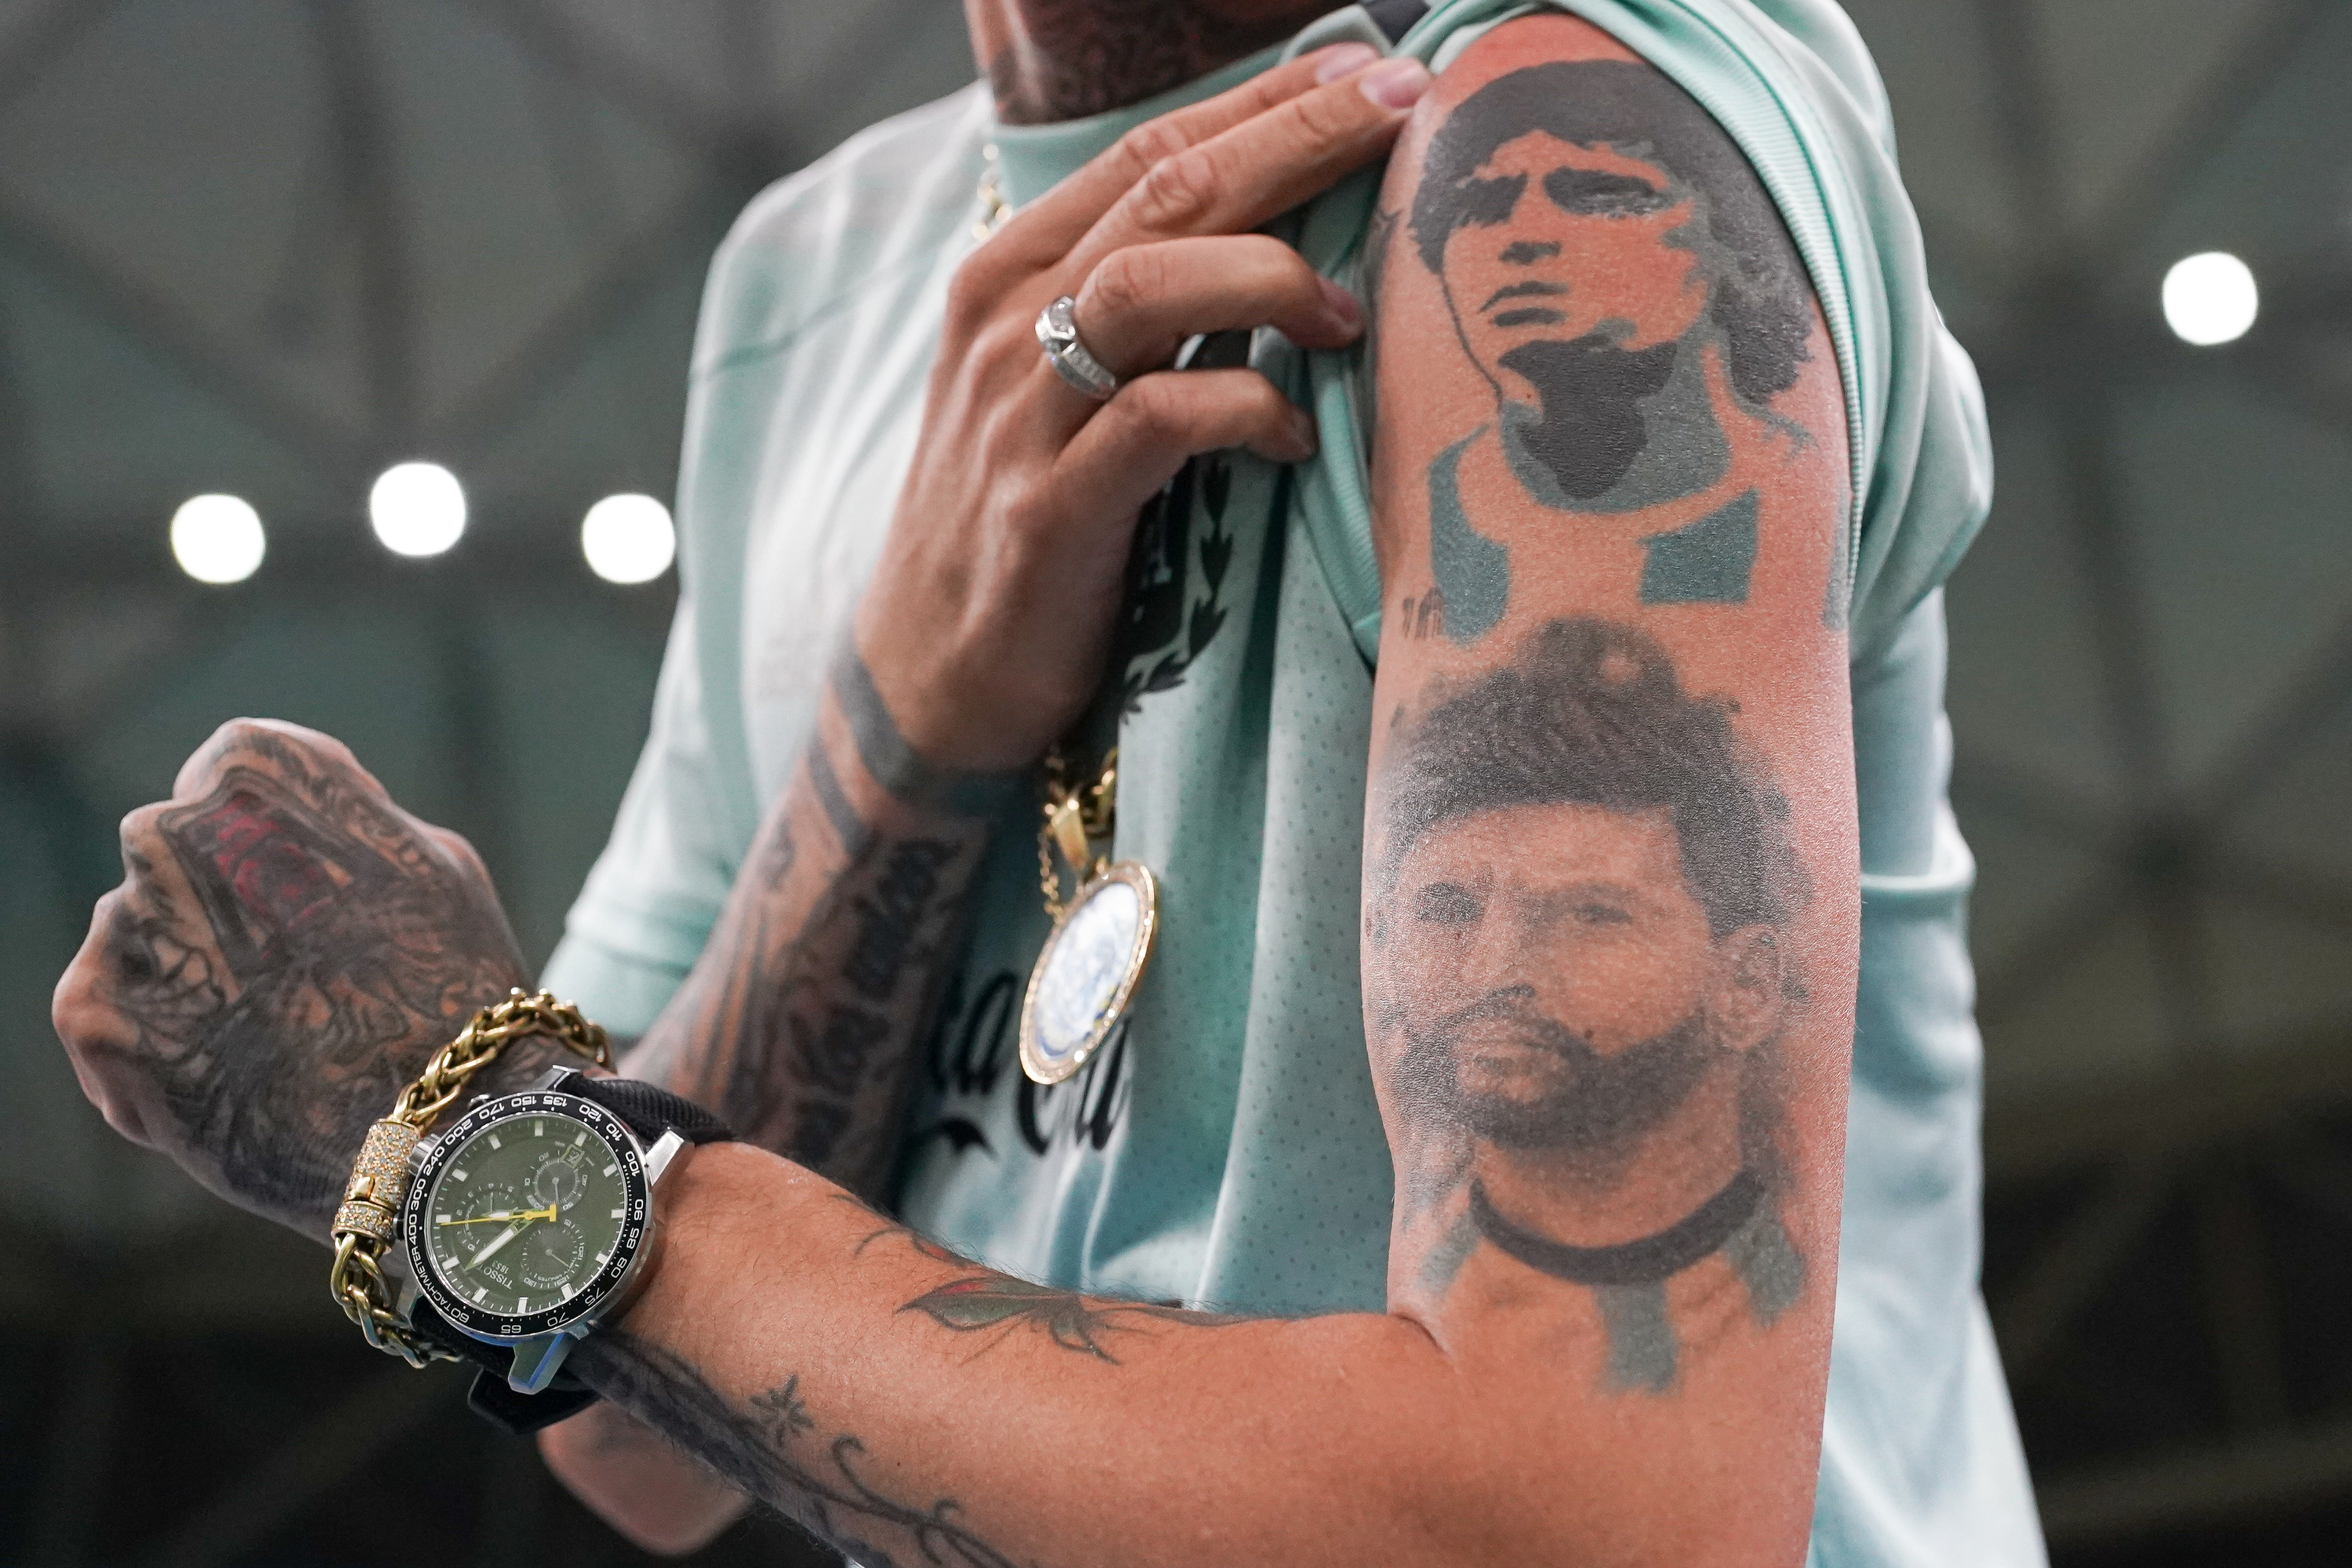 An Argentina fan shows his tattoo of Lionel Messi and Diego Maradona prior to the match between Argentina and Mexico at Khalifa International Stadium in Doha, Qatar on November 26.